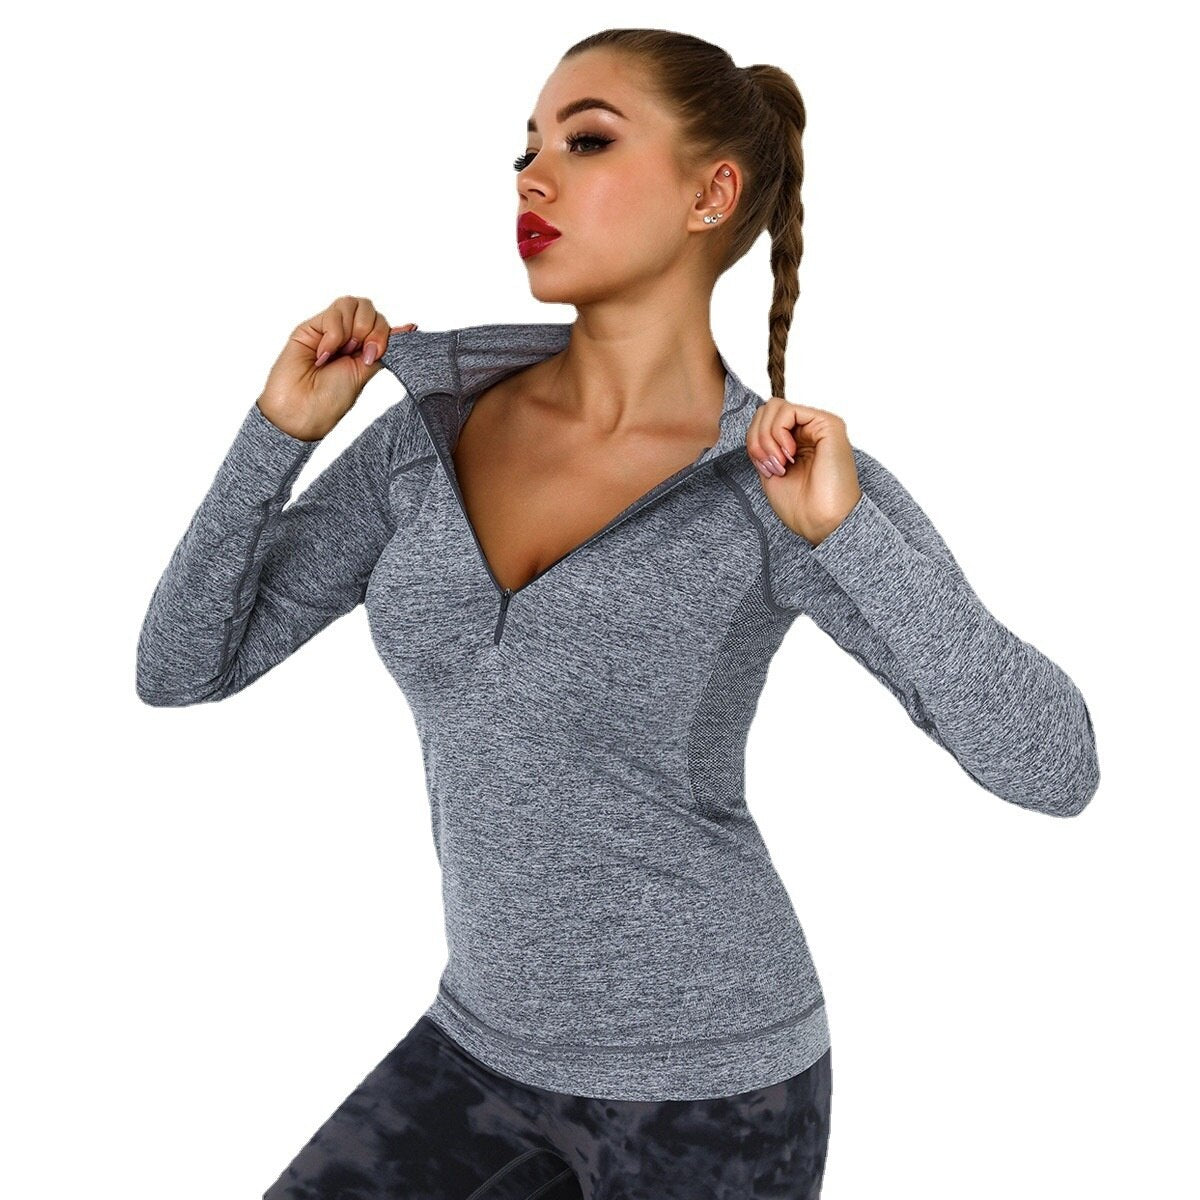 Running Sports Top Women Long Sleeve Zipper Pocket Gym Shirt Fitness Sweater Workout Athletic Active Quick Drying Yoga Blouse